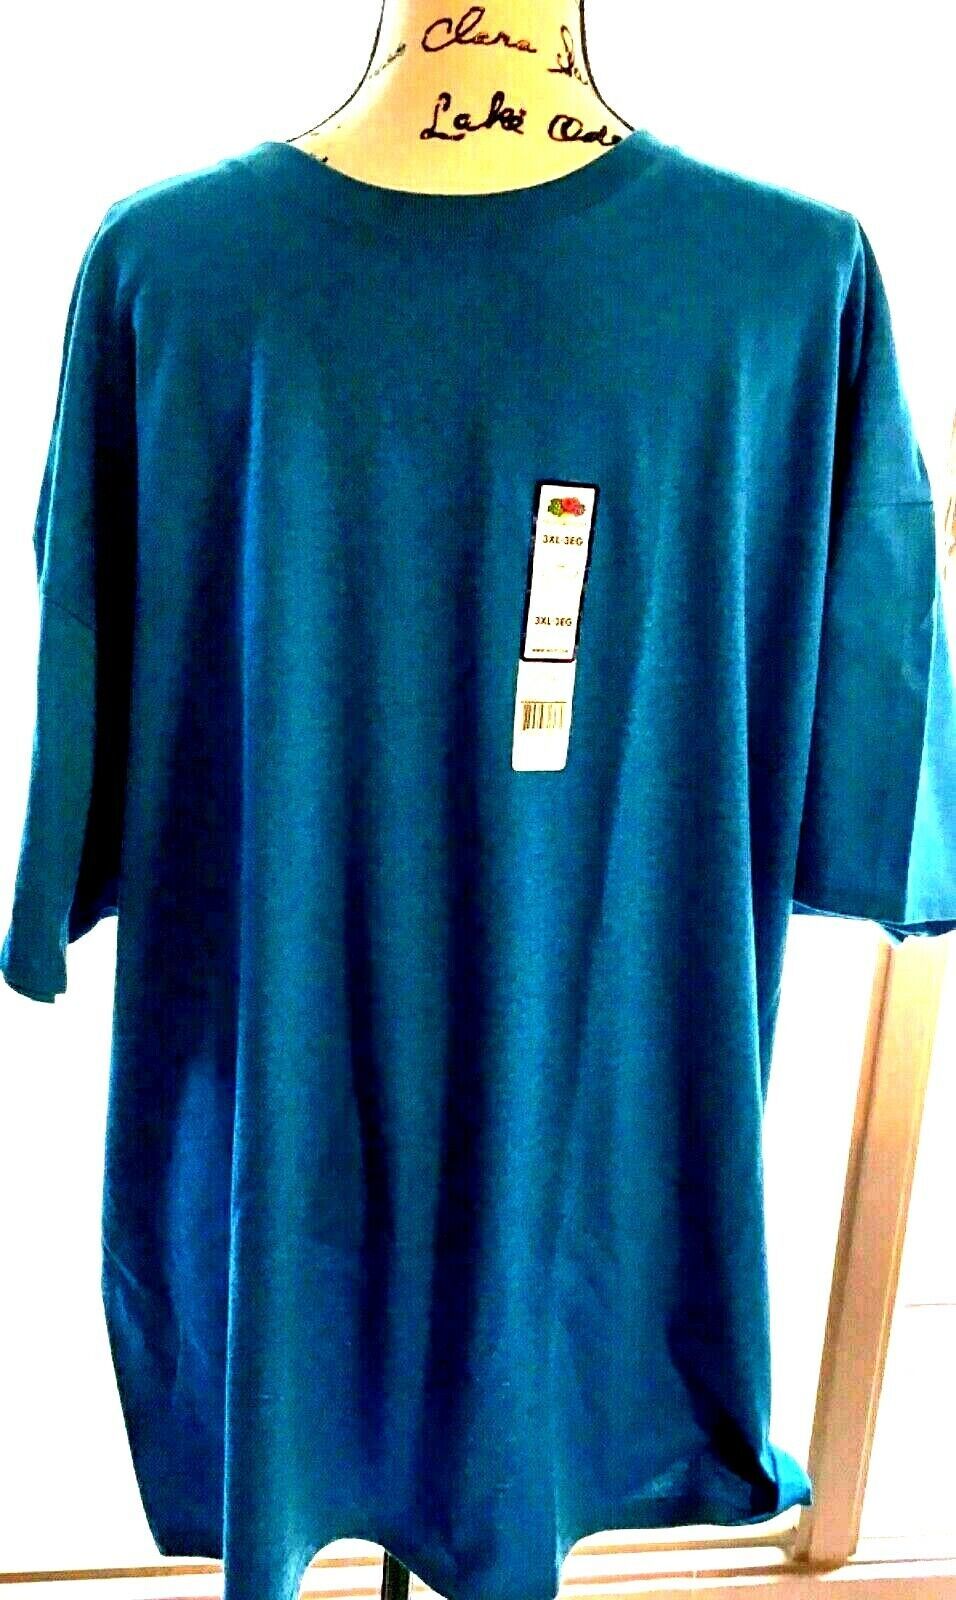 NWT Men’s Fruit of the Loom Blue 3XL TShirt New Cotton Polyester SKU 044-03 - $6.82